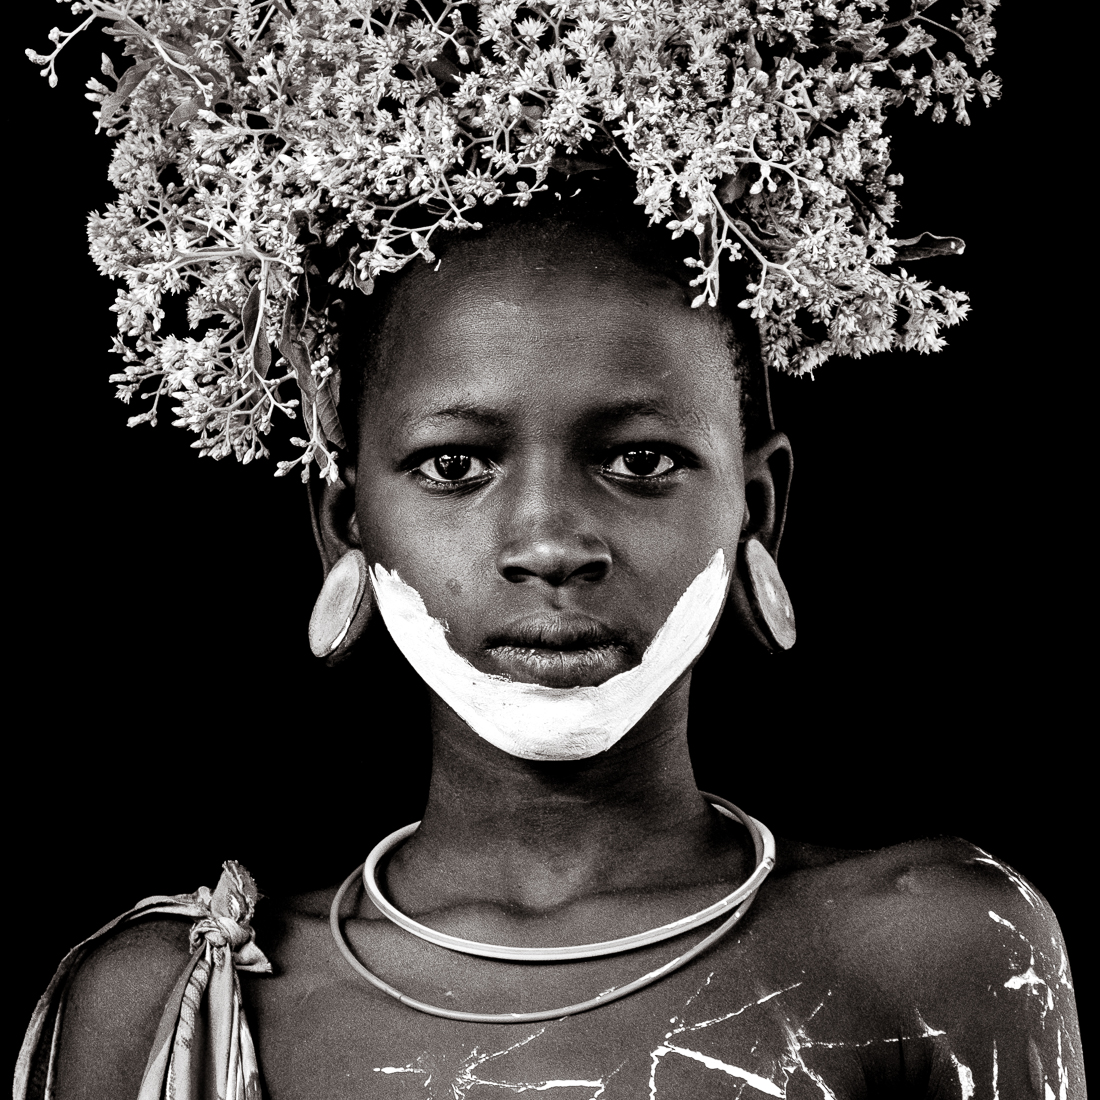 The Suri Tribe of the Omo Valley.